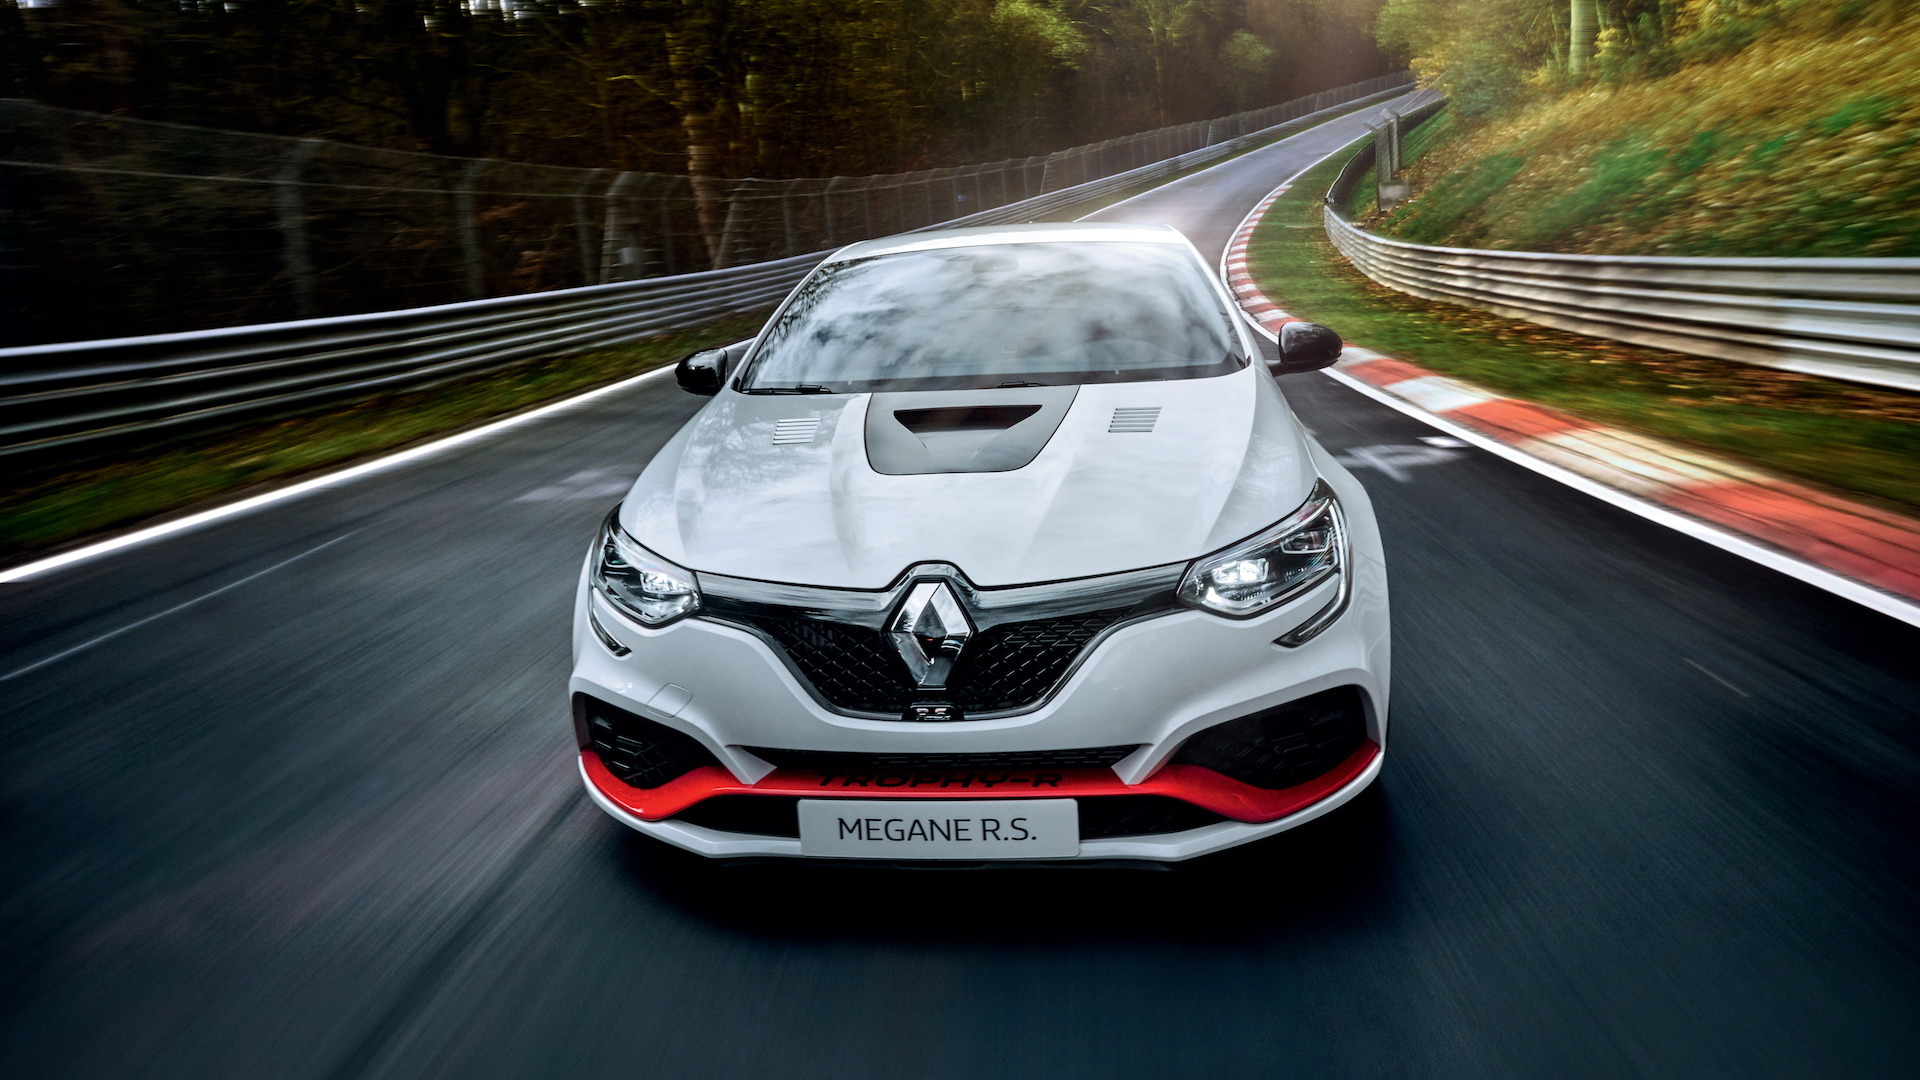 Renault Megane Rs Trophy R Is Your New Front Wheel Drive Ring Record Holder